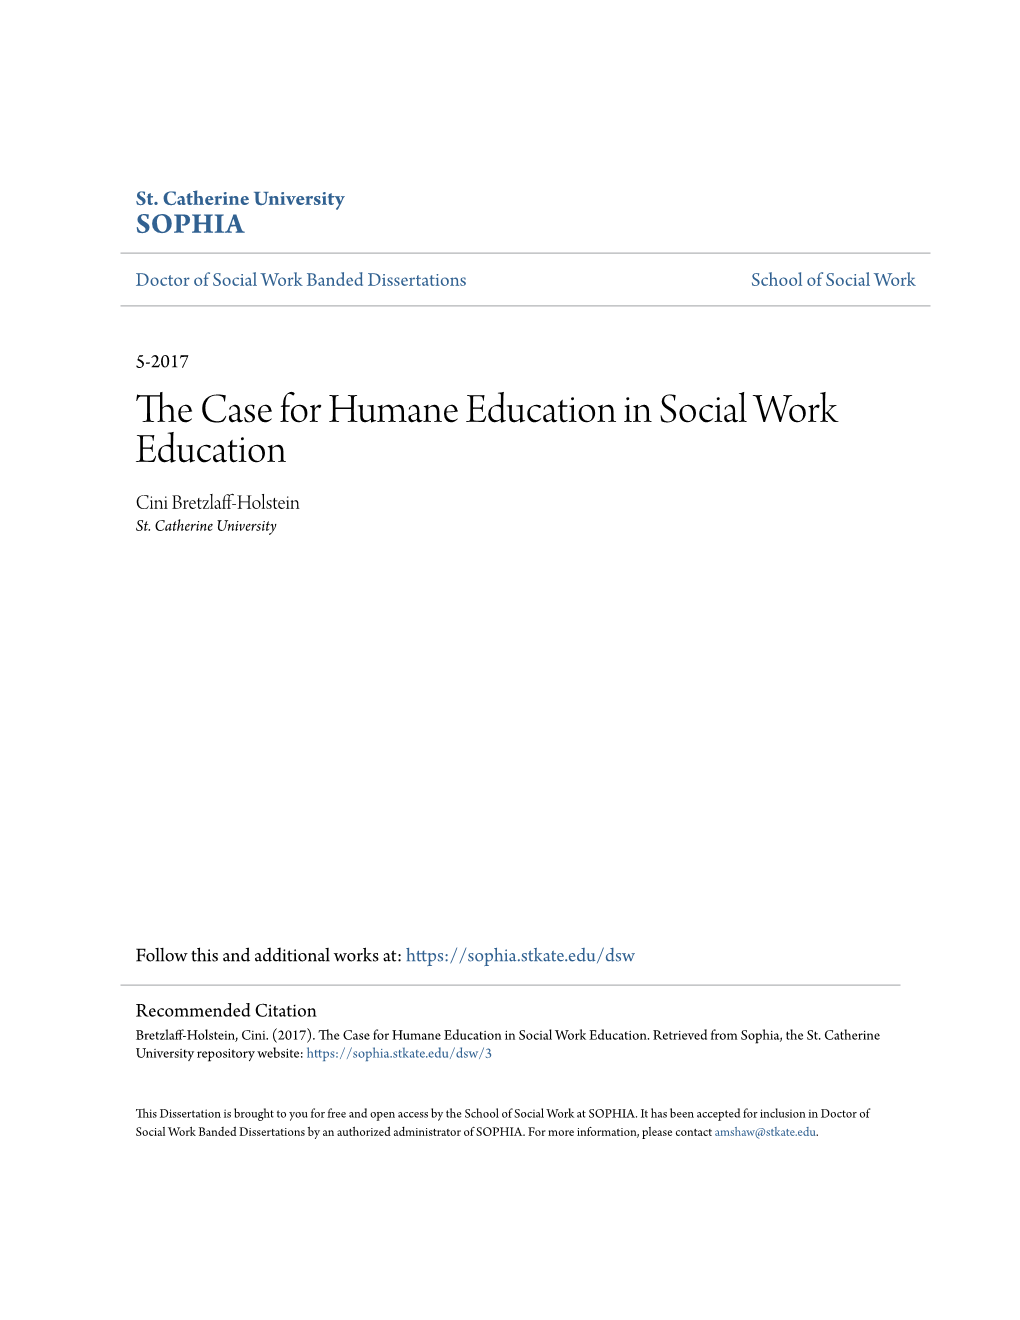 The Case for Humane Education in Social Work Education